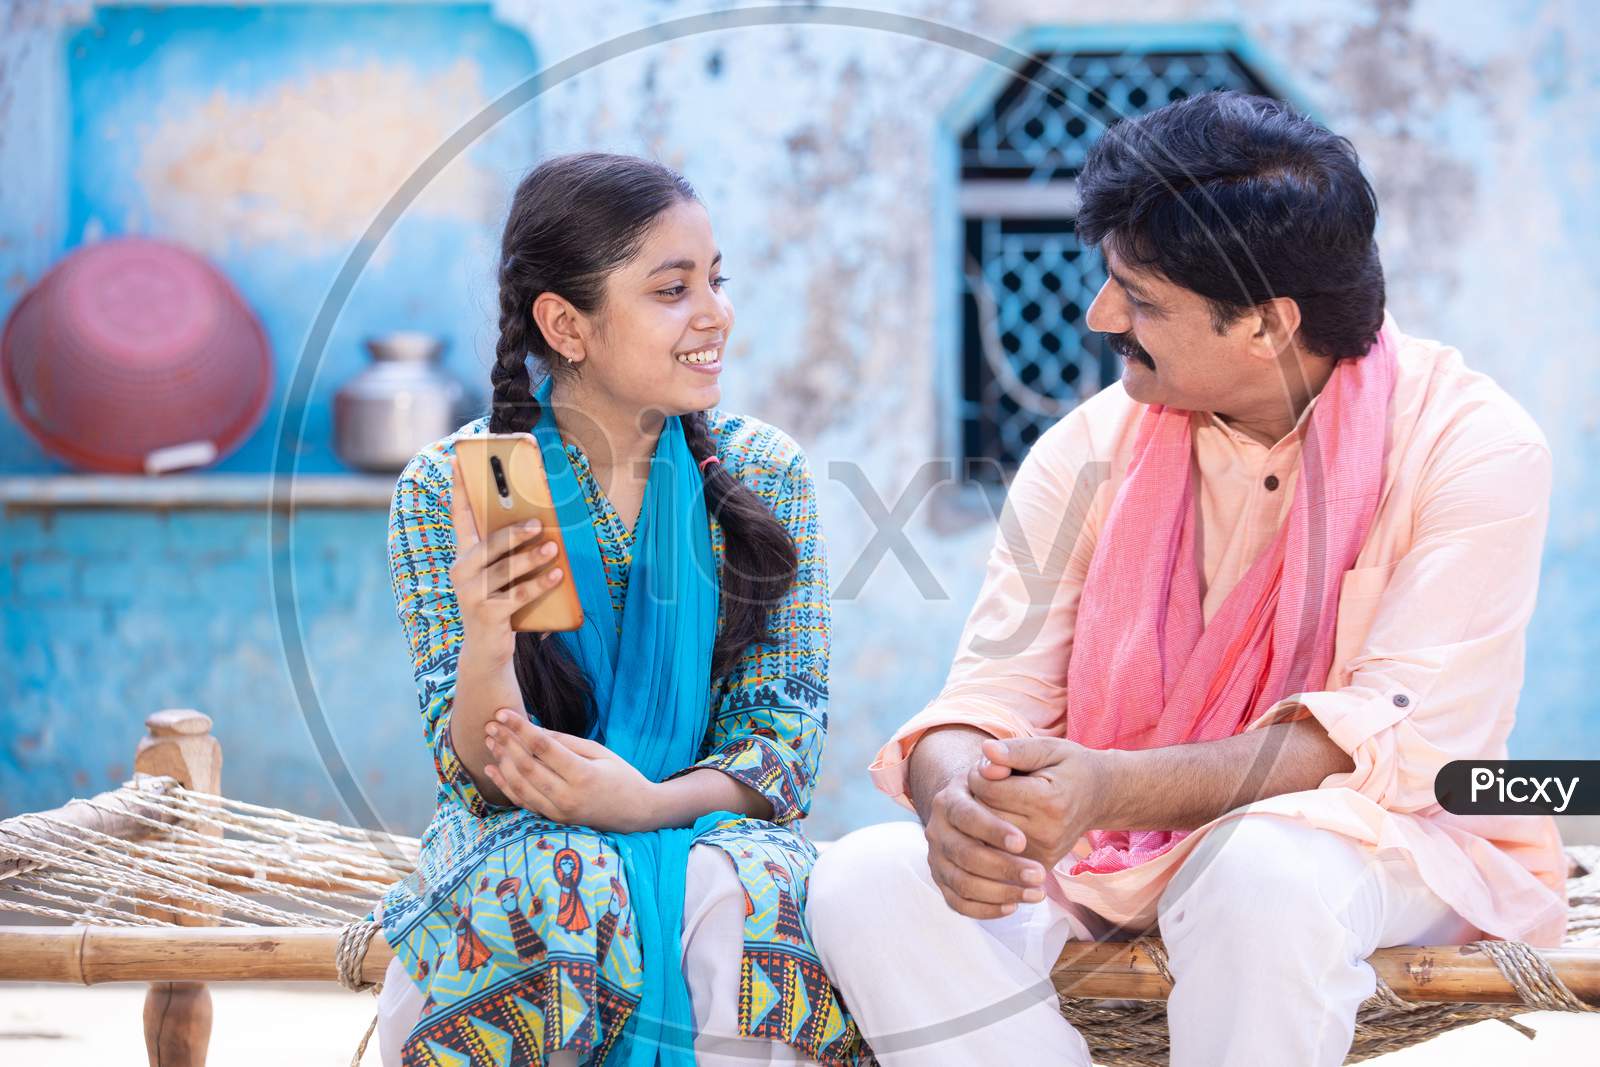 Cheerful Indian Father And Young Daughter Using Smartphone Looking At Each Other While Sitting On Traditional Wooden Bed Outside Their House, Happy Rural Family, Technology Concept.